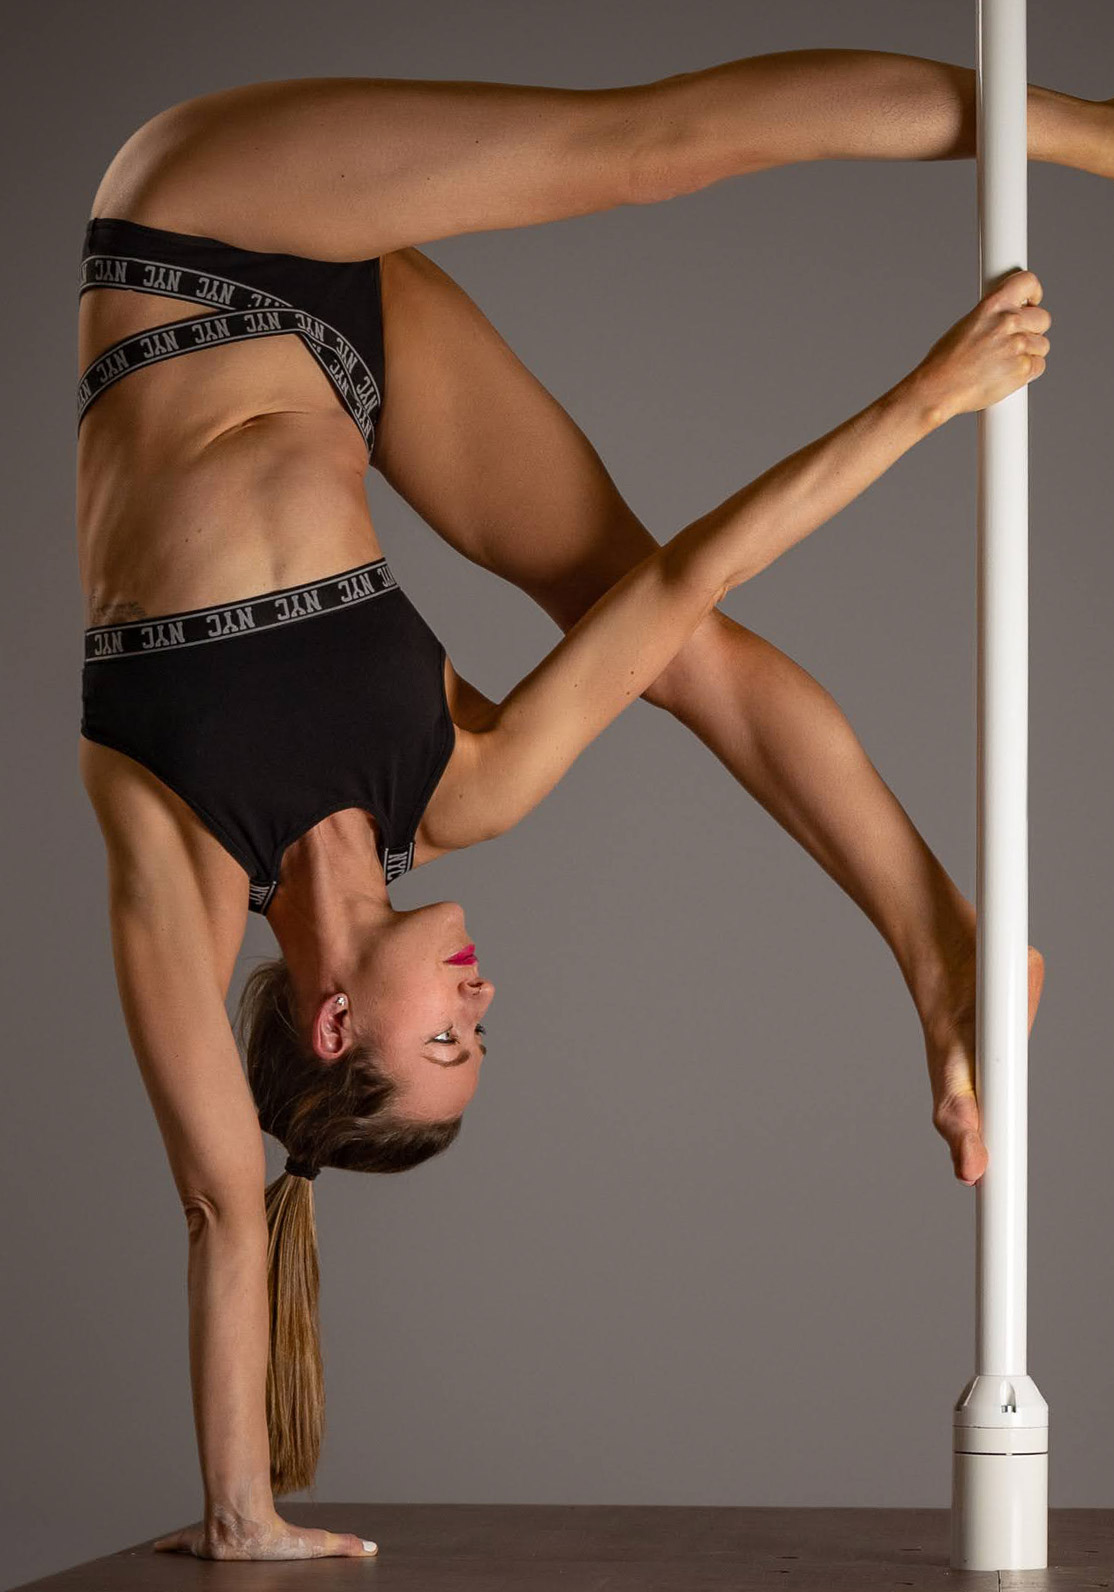 Pole Dancing's Heritage Deserves To Be Respected, Not Sanitised